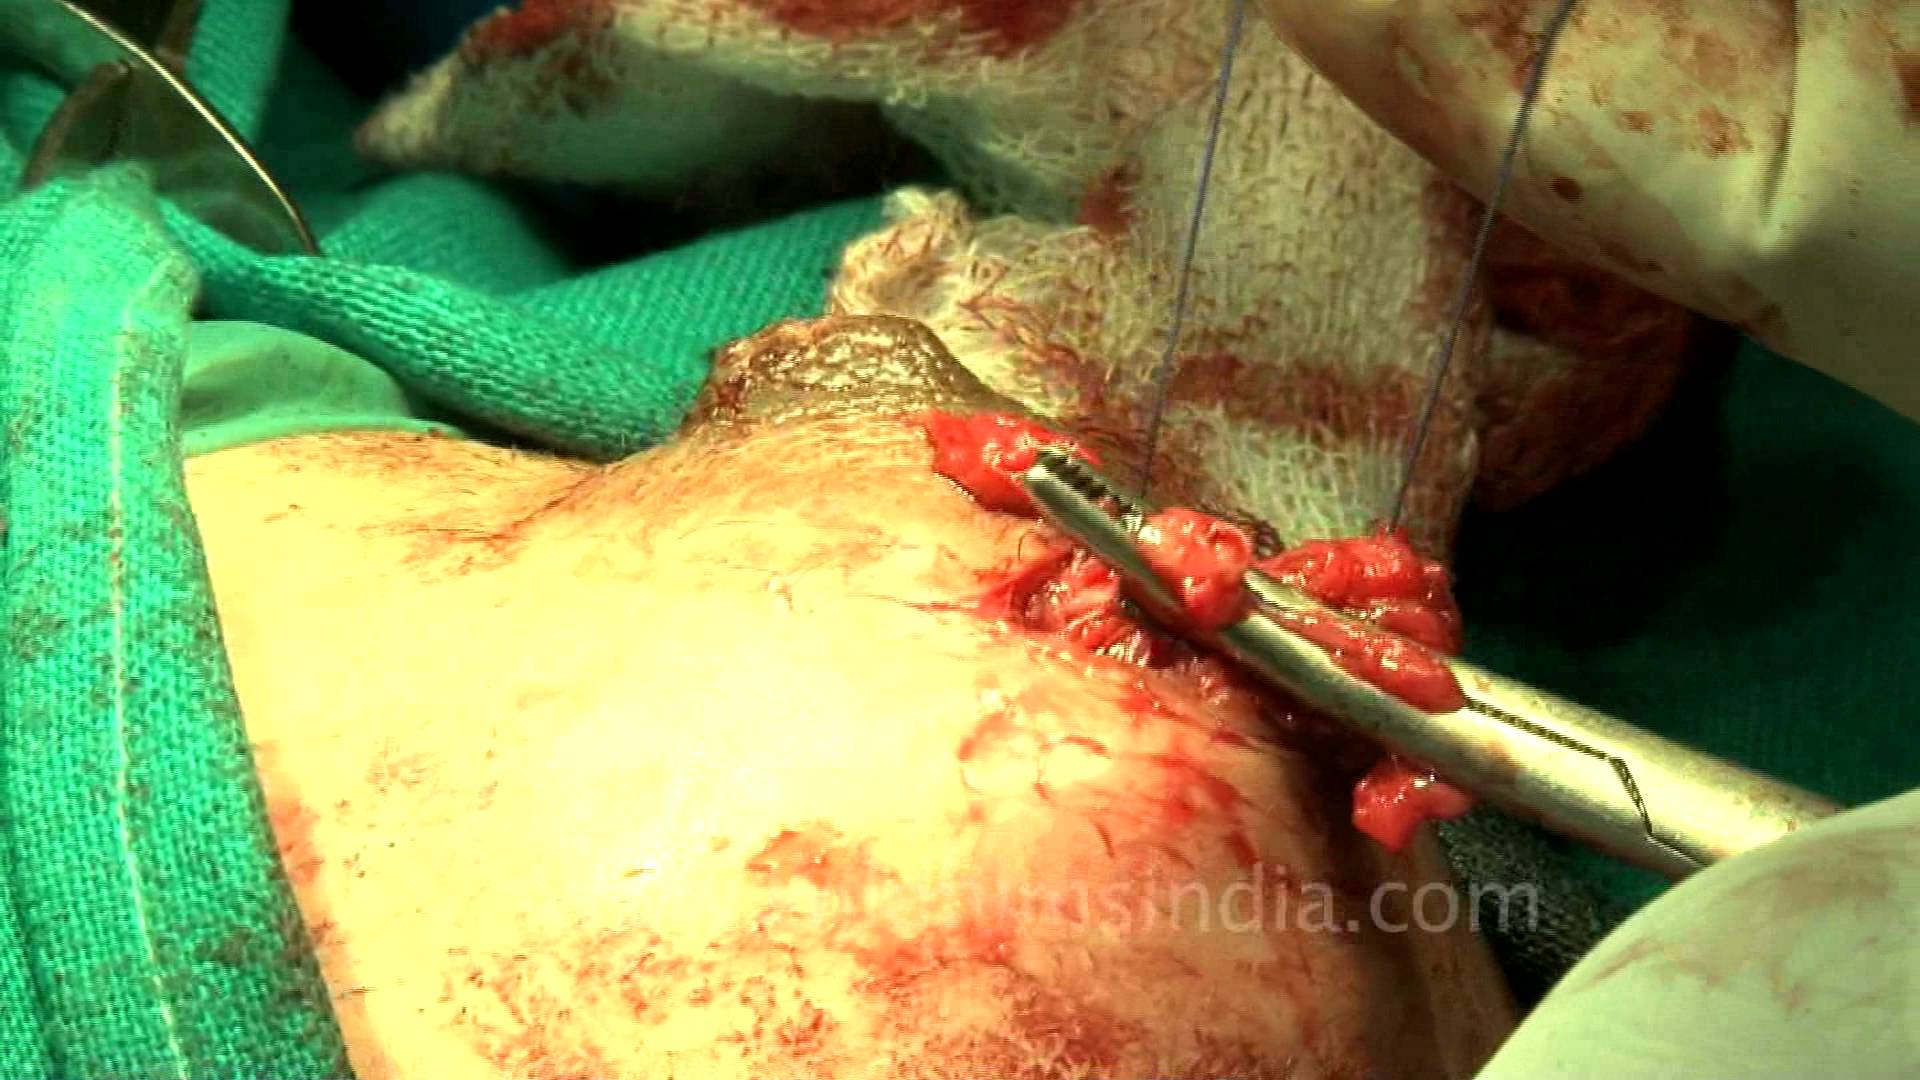 Stitching the incision after the surgery - YouTube